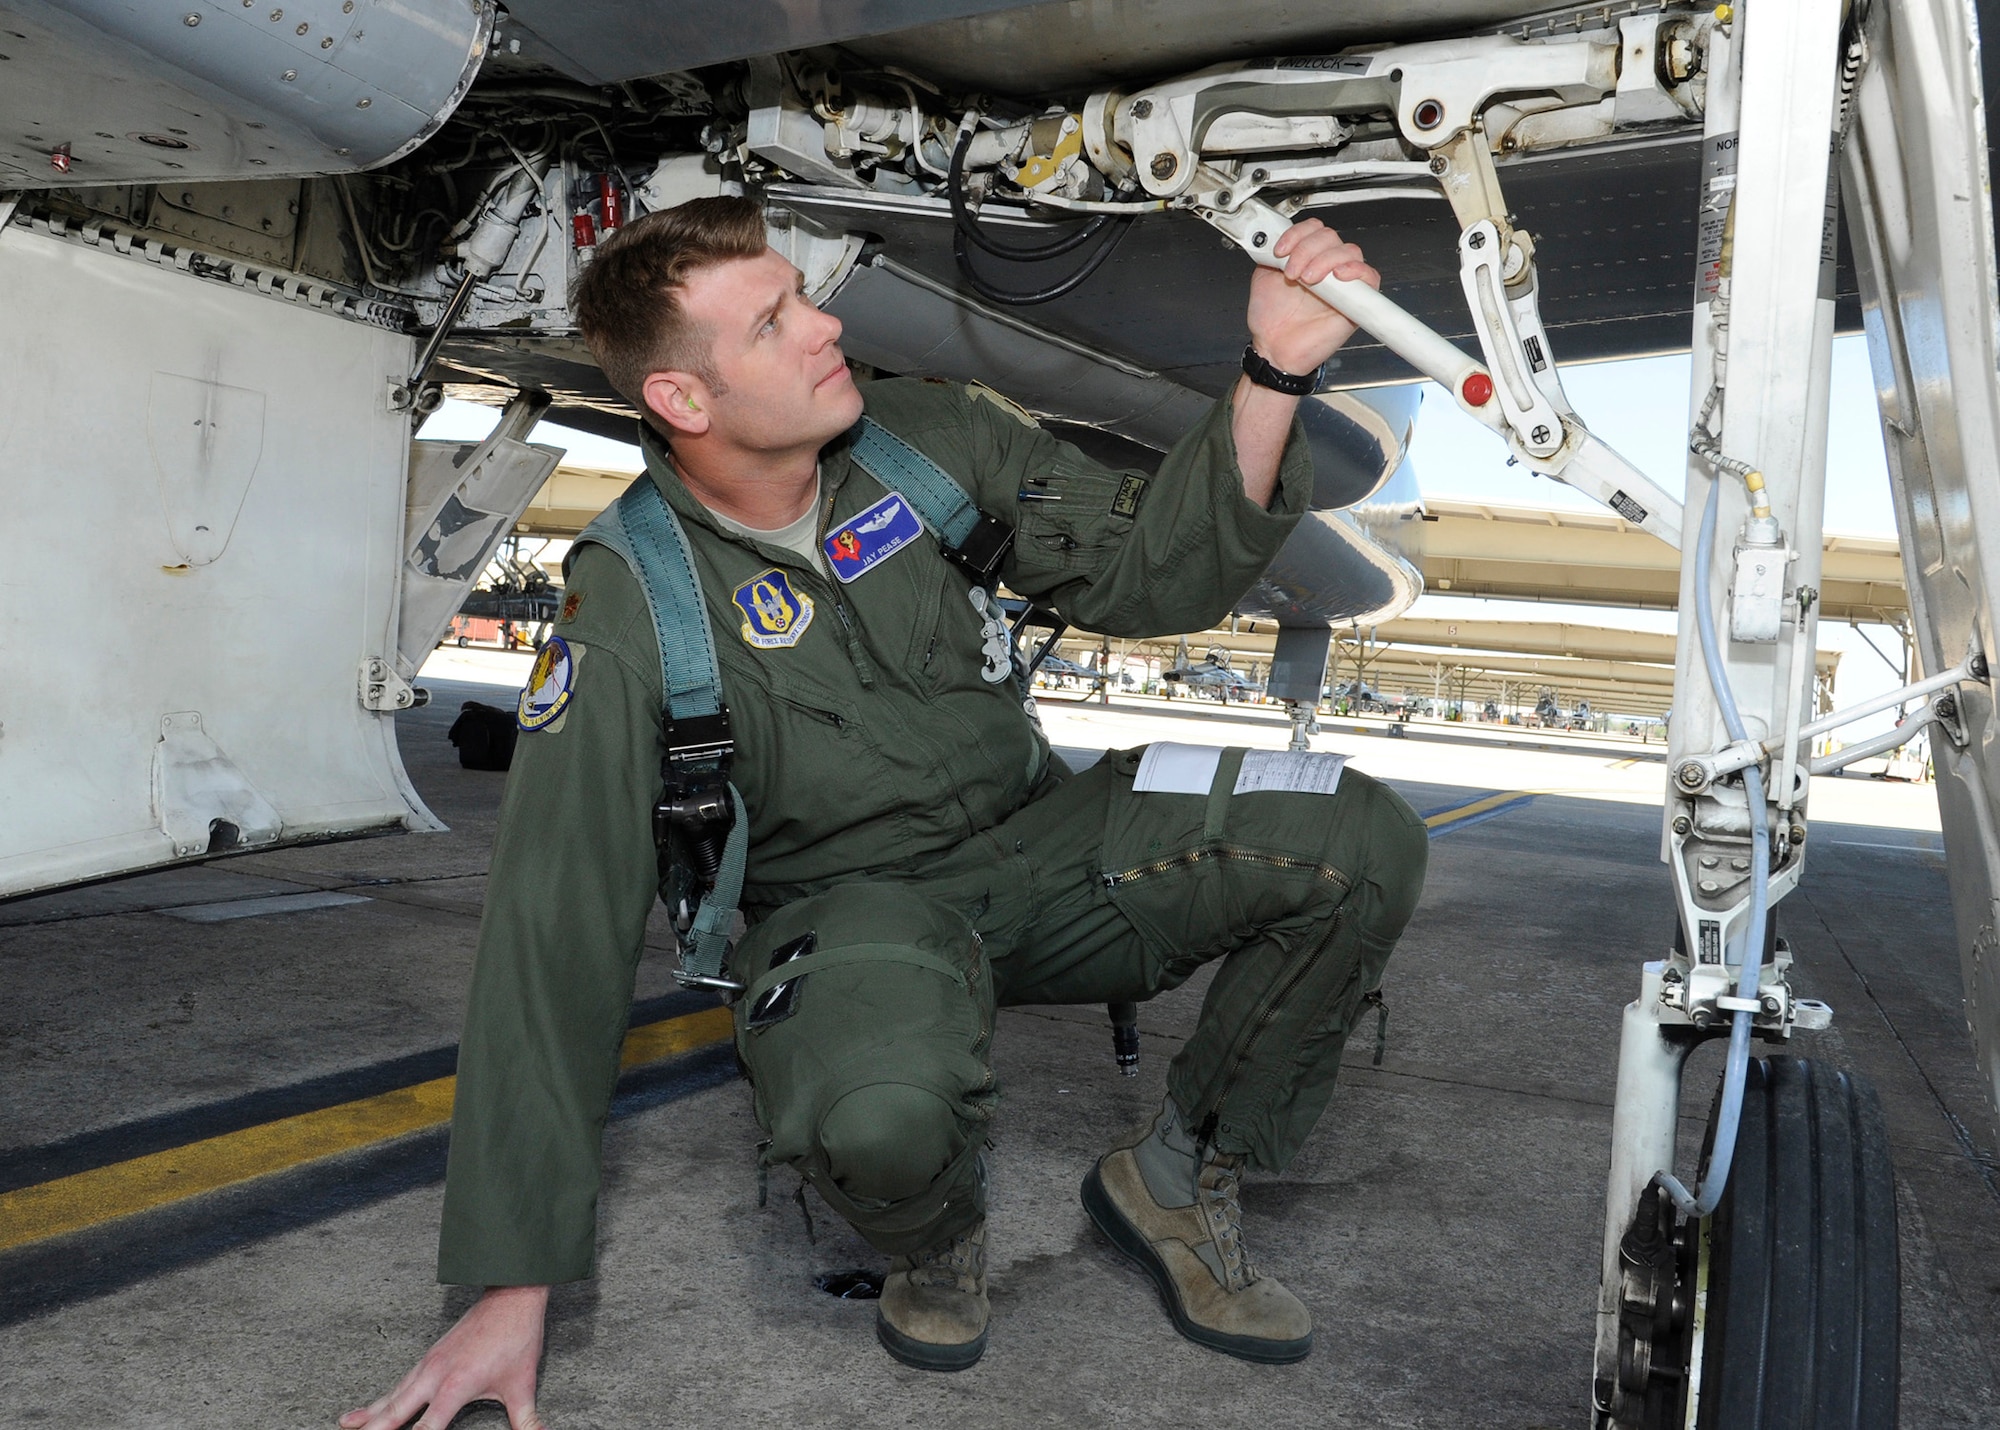 Maj. Jay Pease, 39th Flying Training Squadron instructor pilot, performs a pre-flight check on a T-38 Talon aircraft at Joint Base San Antonio-Randolph, Texas. Members of the 39th play a key role in the instructor pilot training mission by providing both manpower and experience. (Harold China)